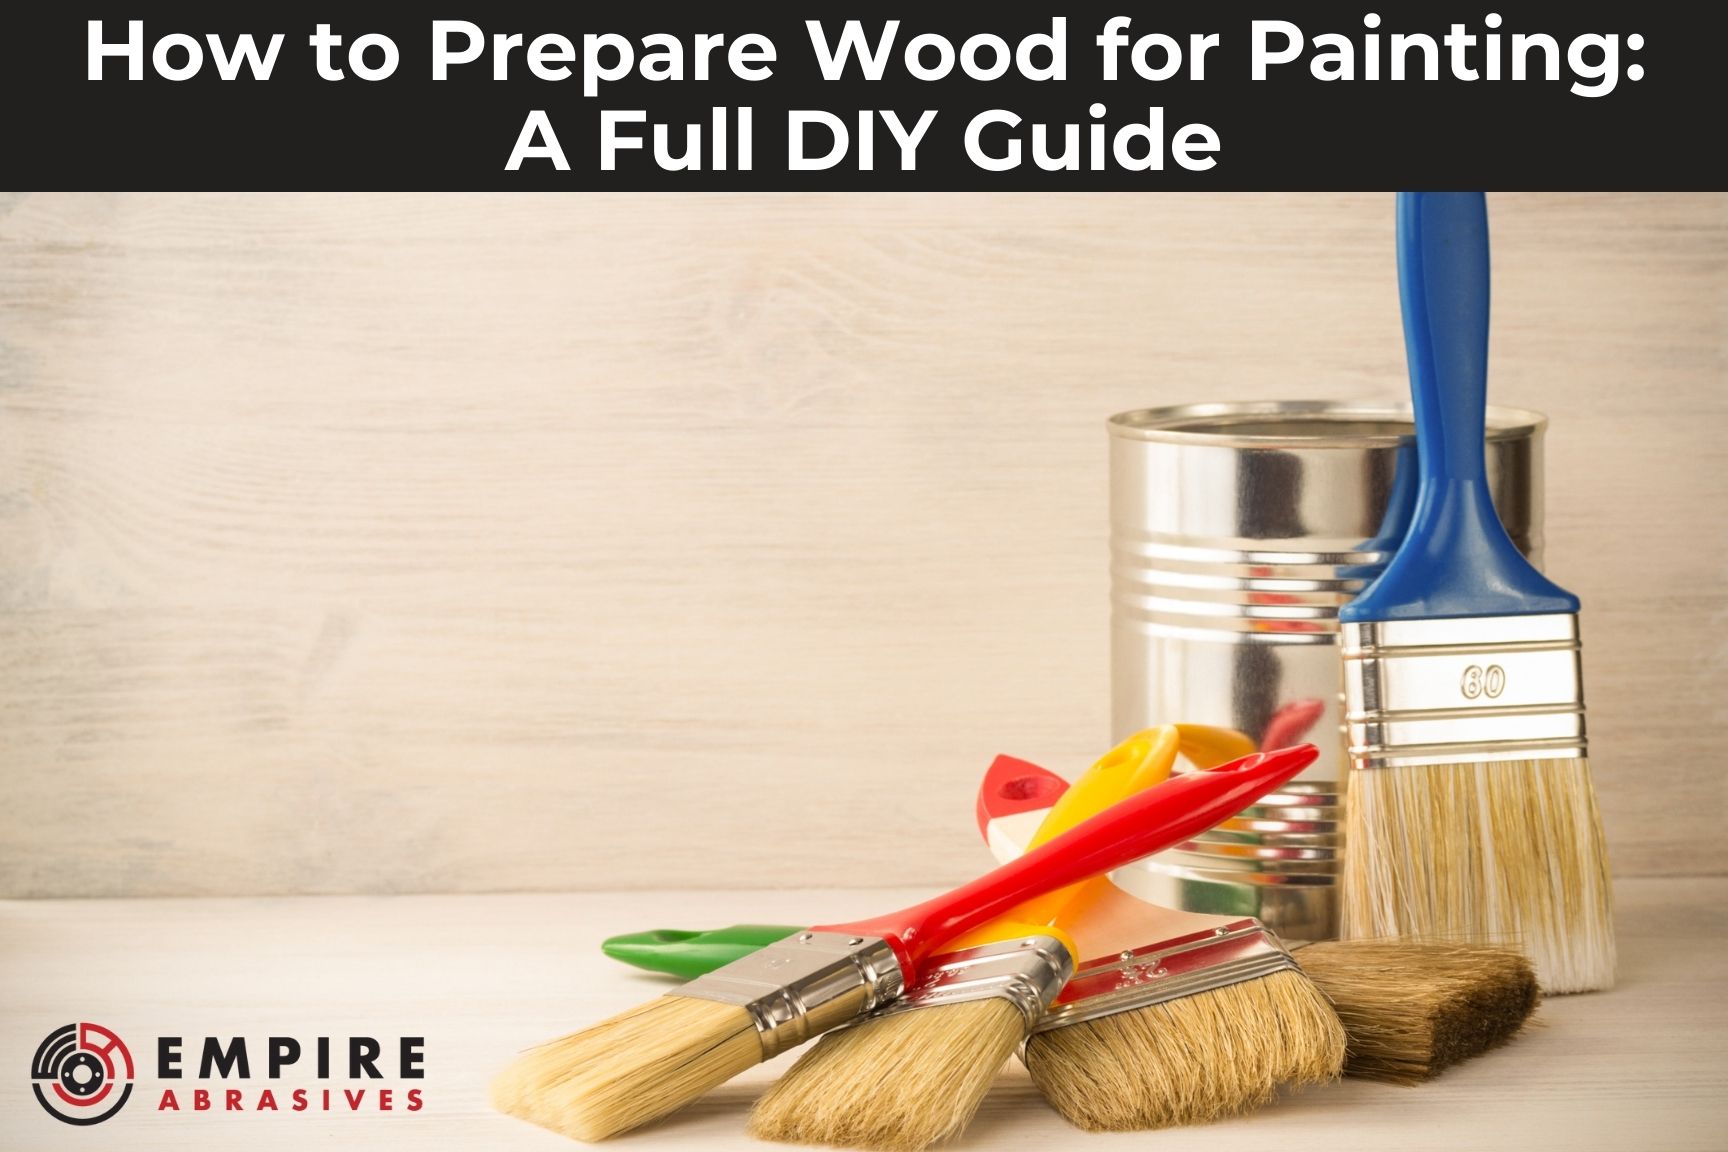 DIY wood painting guide with brushes and paint can on wooden surface,